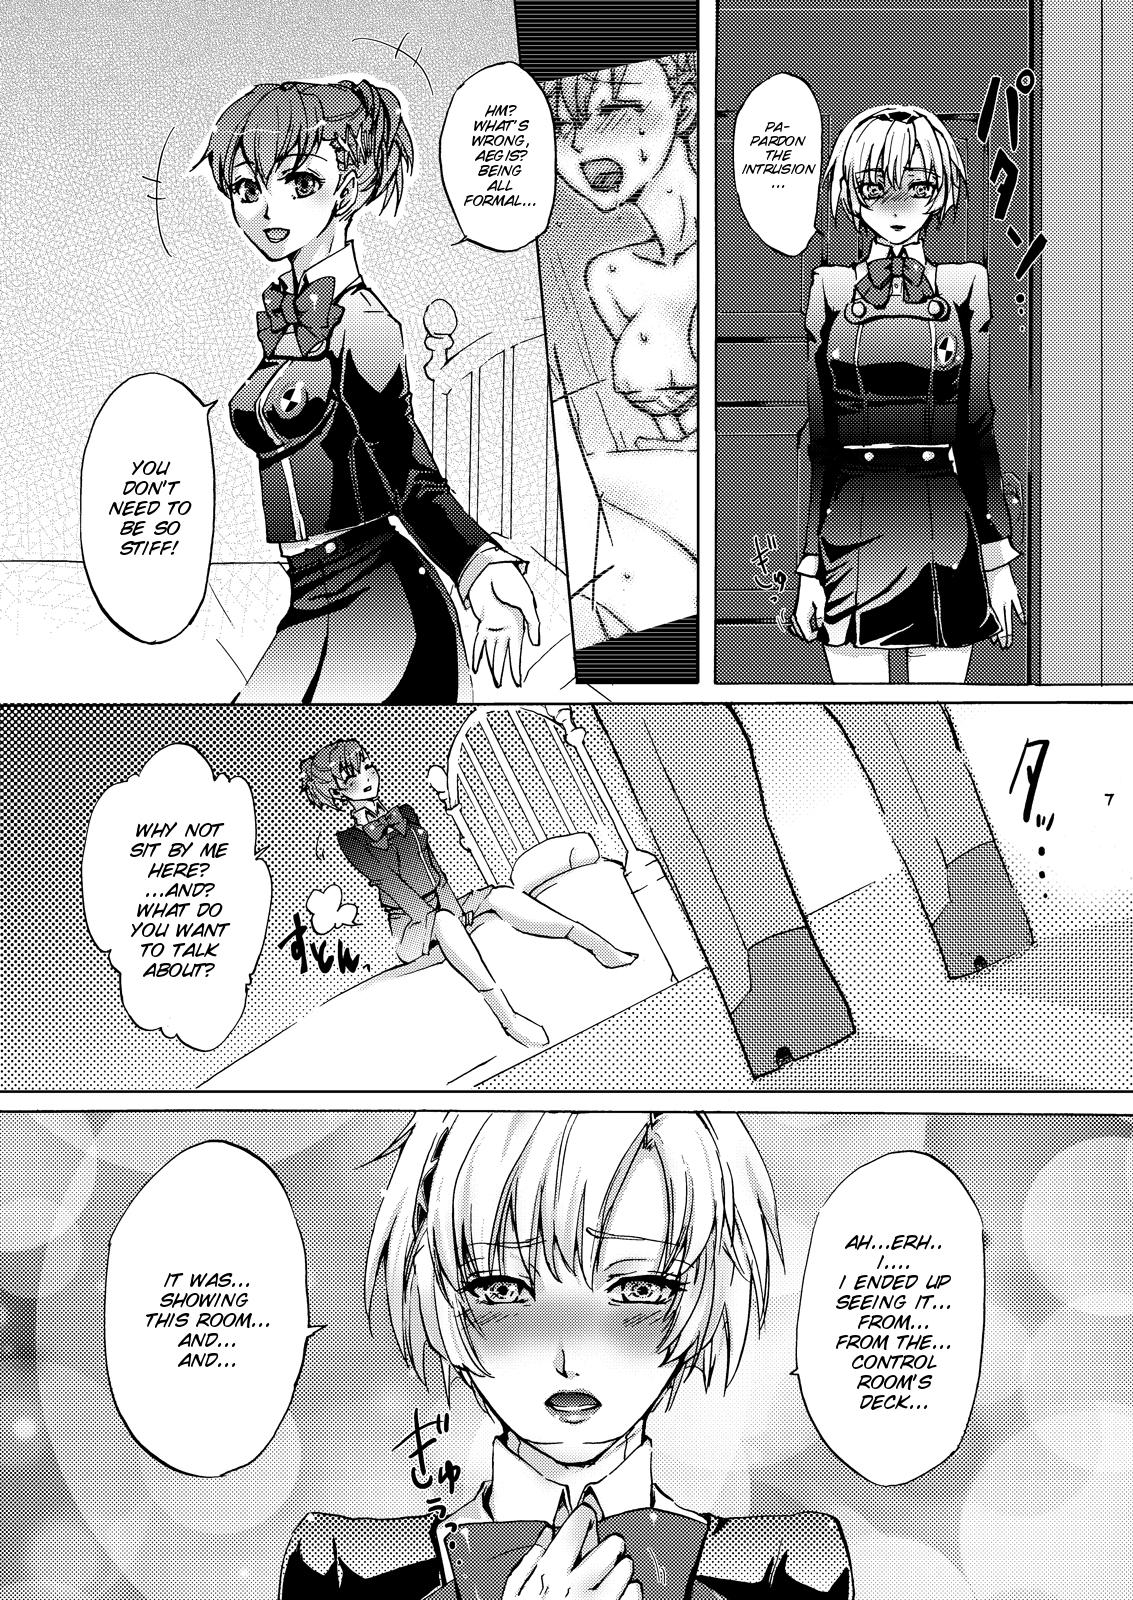 Juicy AIGIS! STRIKE! - Persona 3 Perfect Butt - Page 7